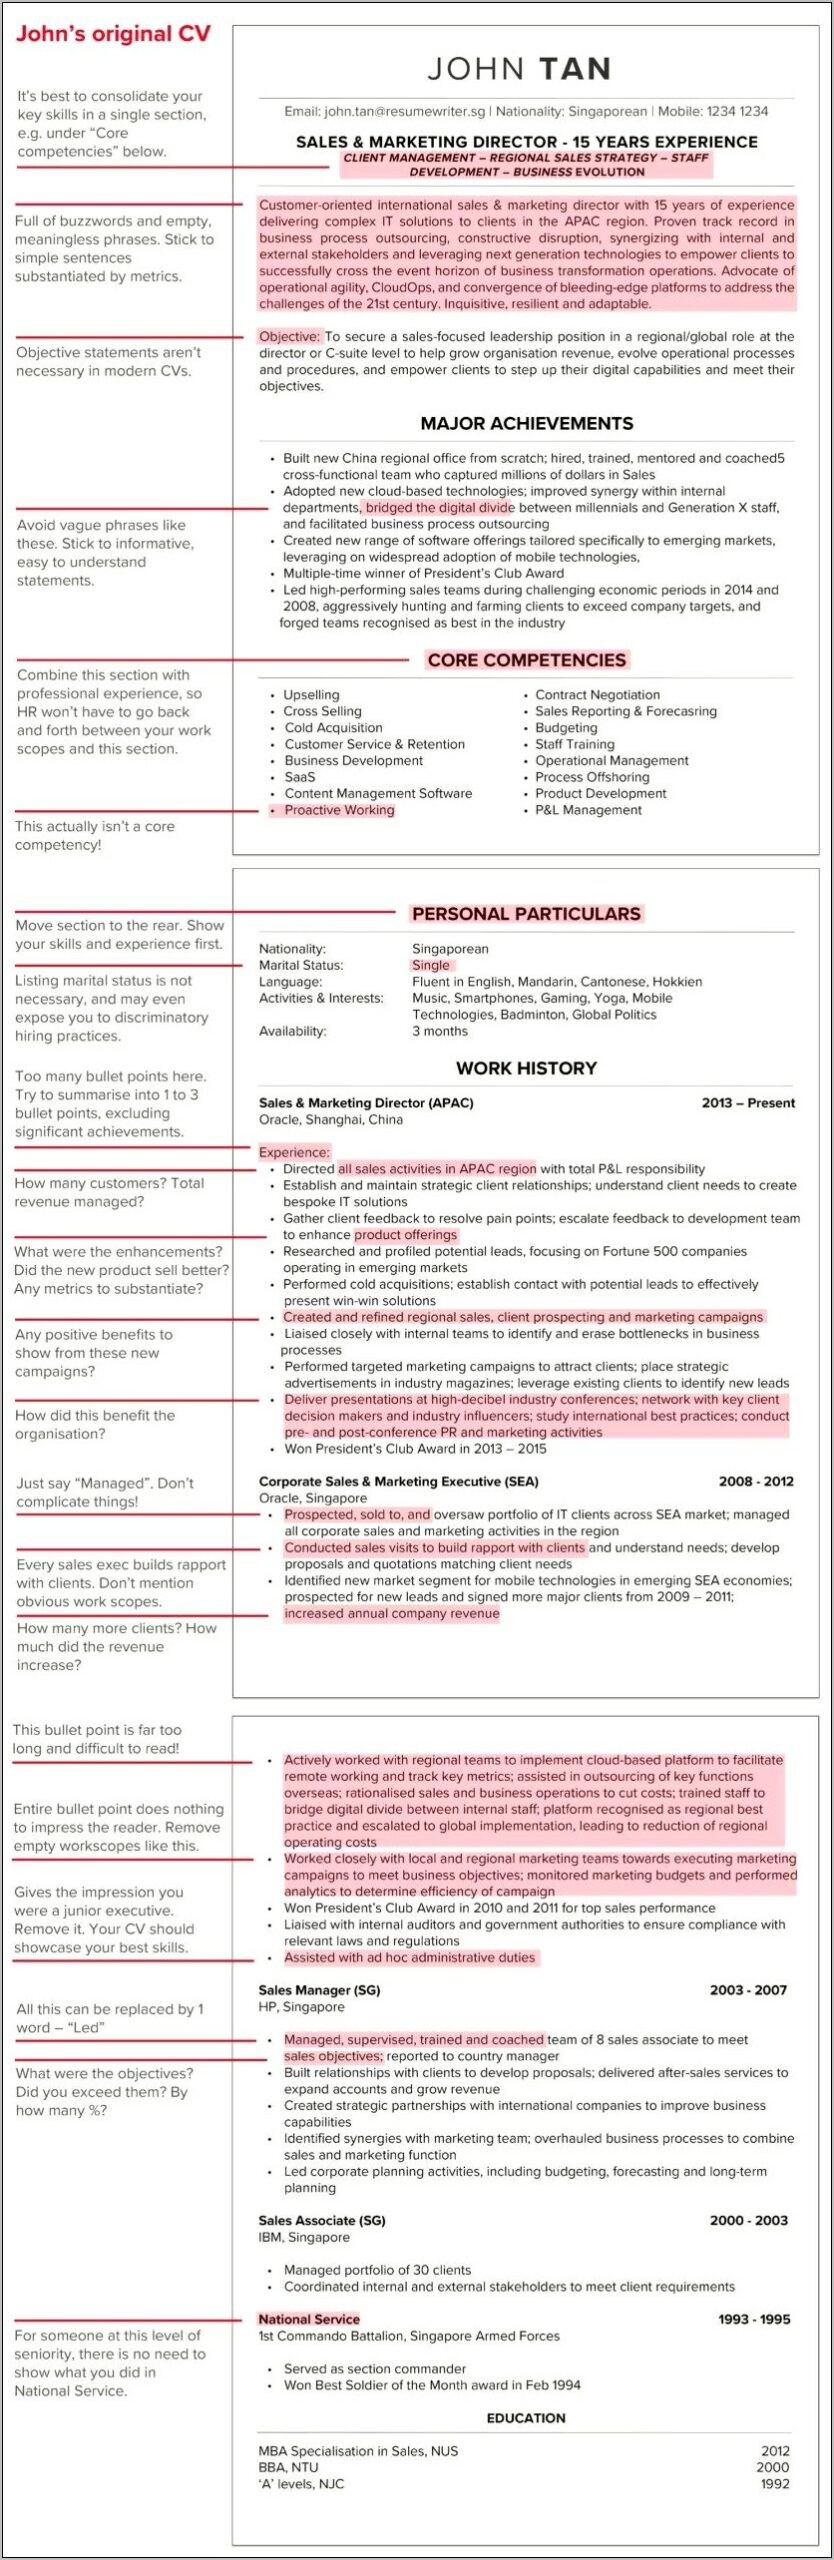 Is Seasoned A Good Word For Resume